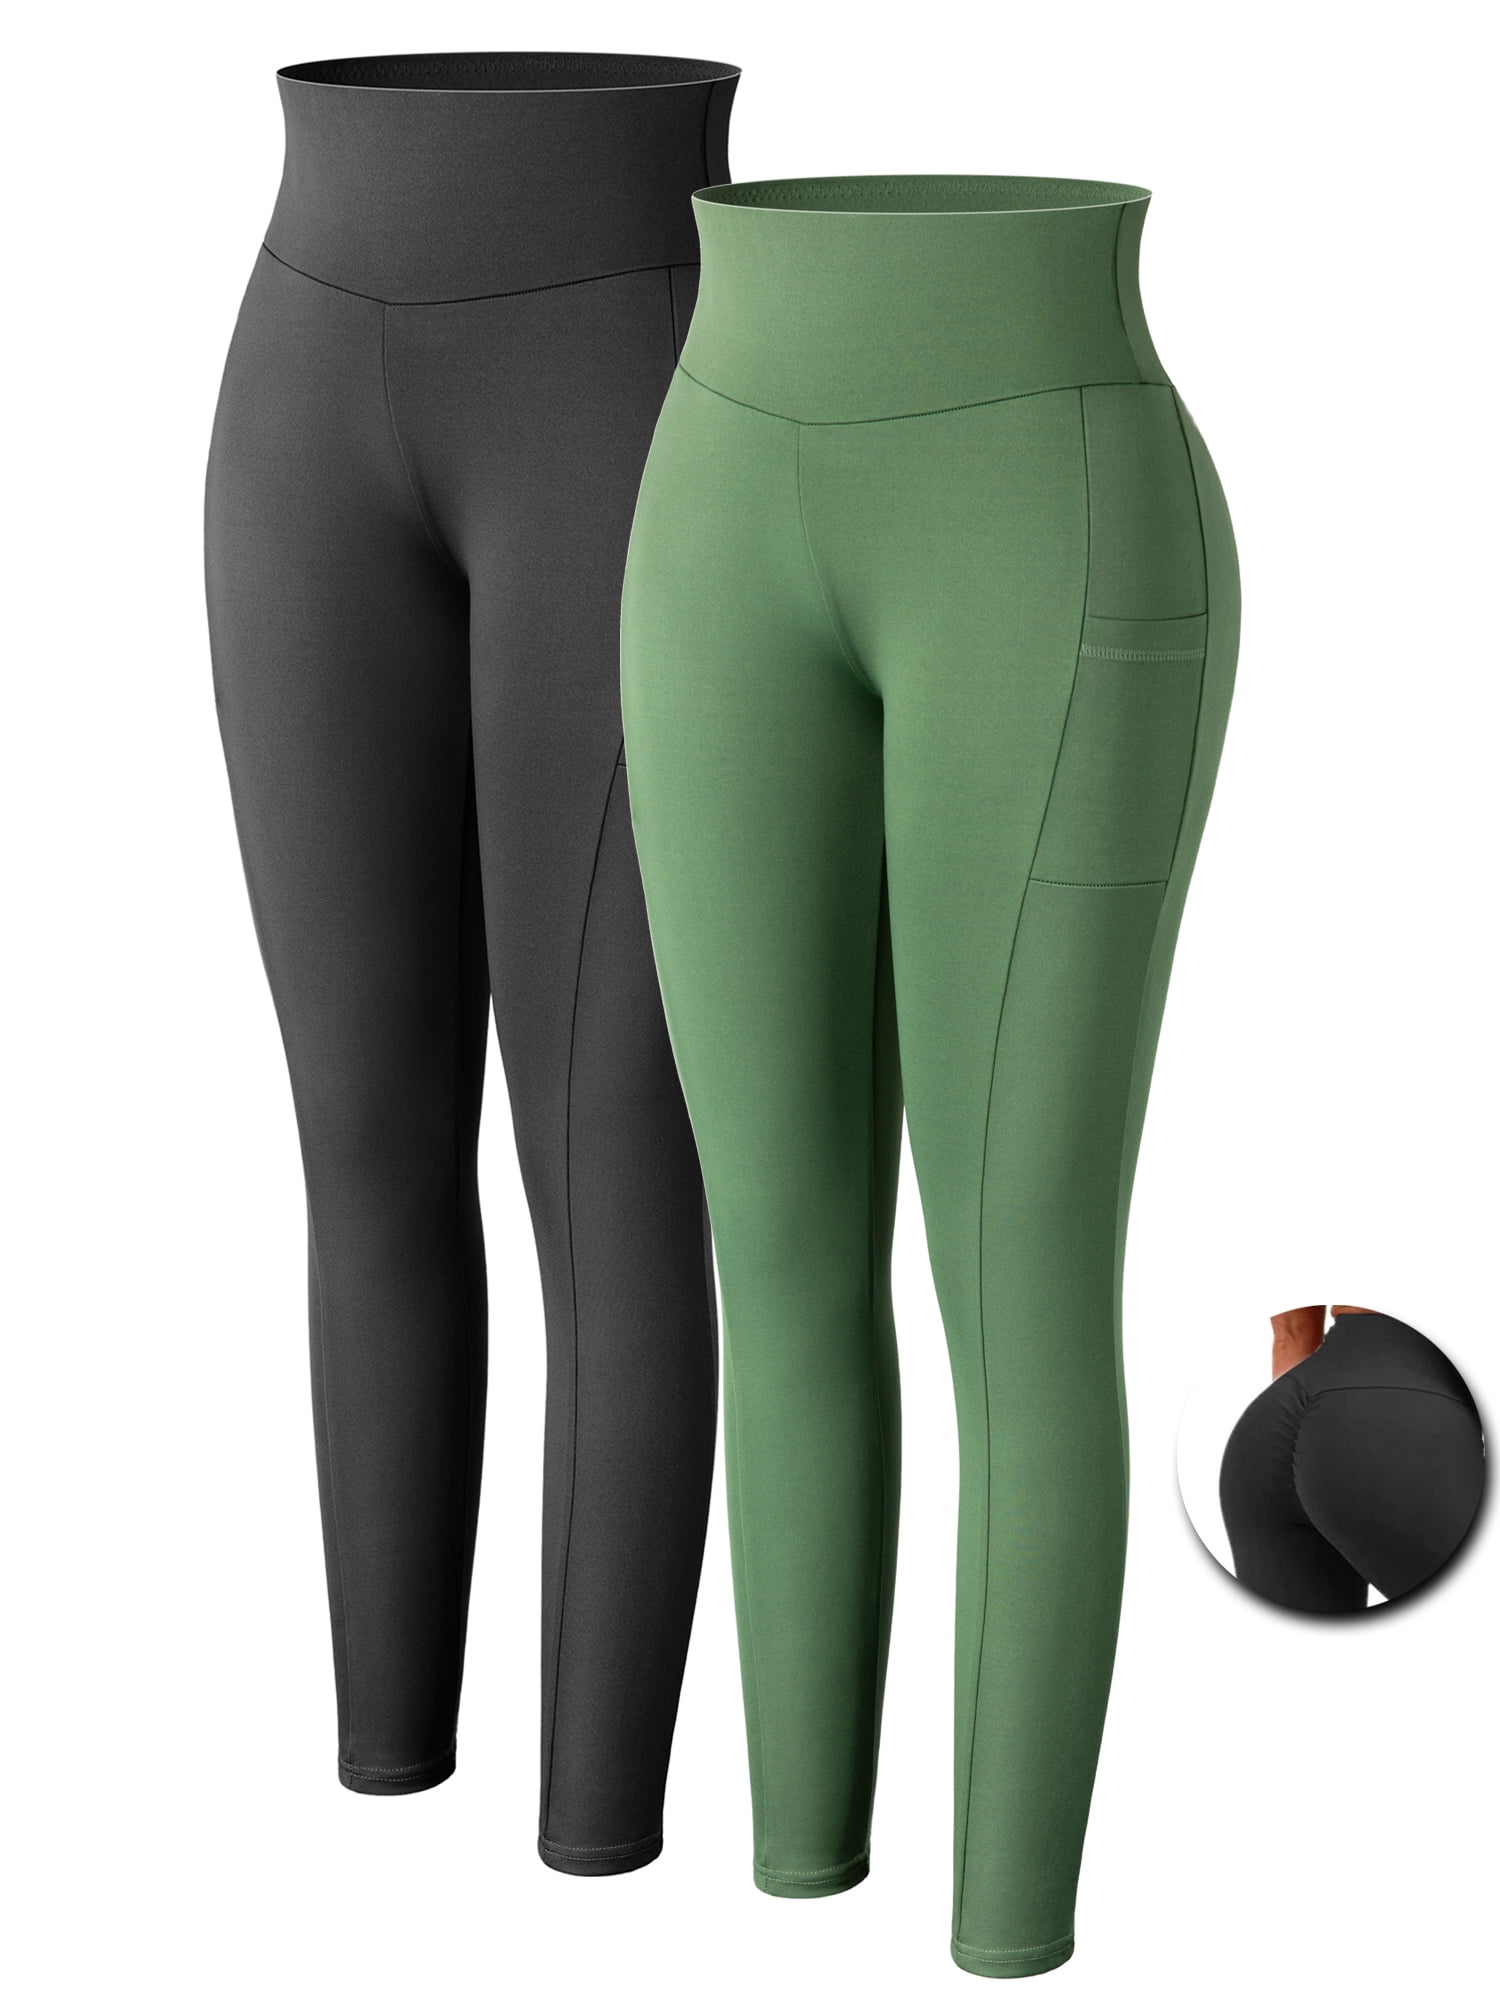 2 Pack High Waist Yoga Leggings With Pockets For Women 4 Way Stretch Yoga Leggings Workout